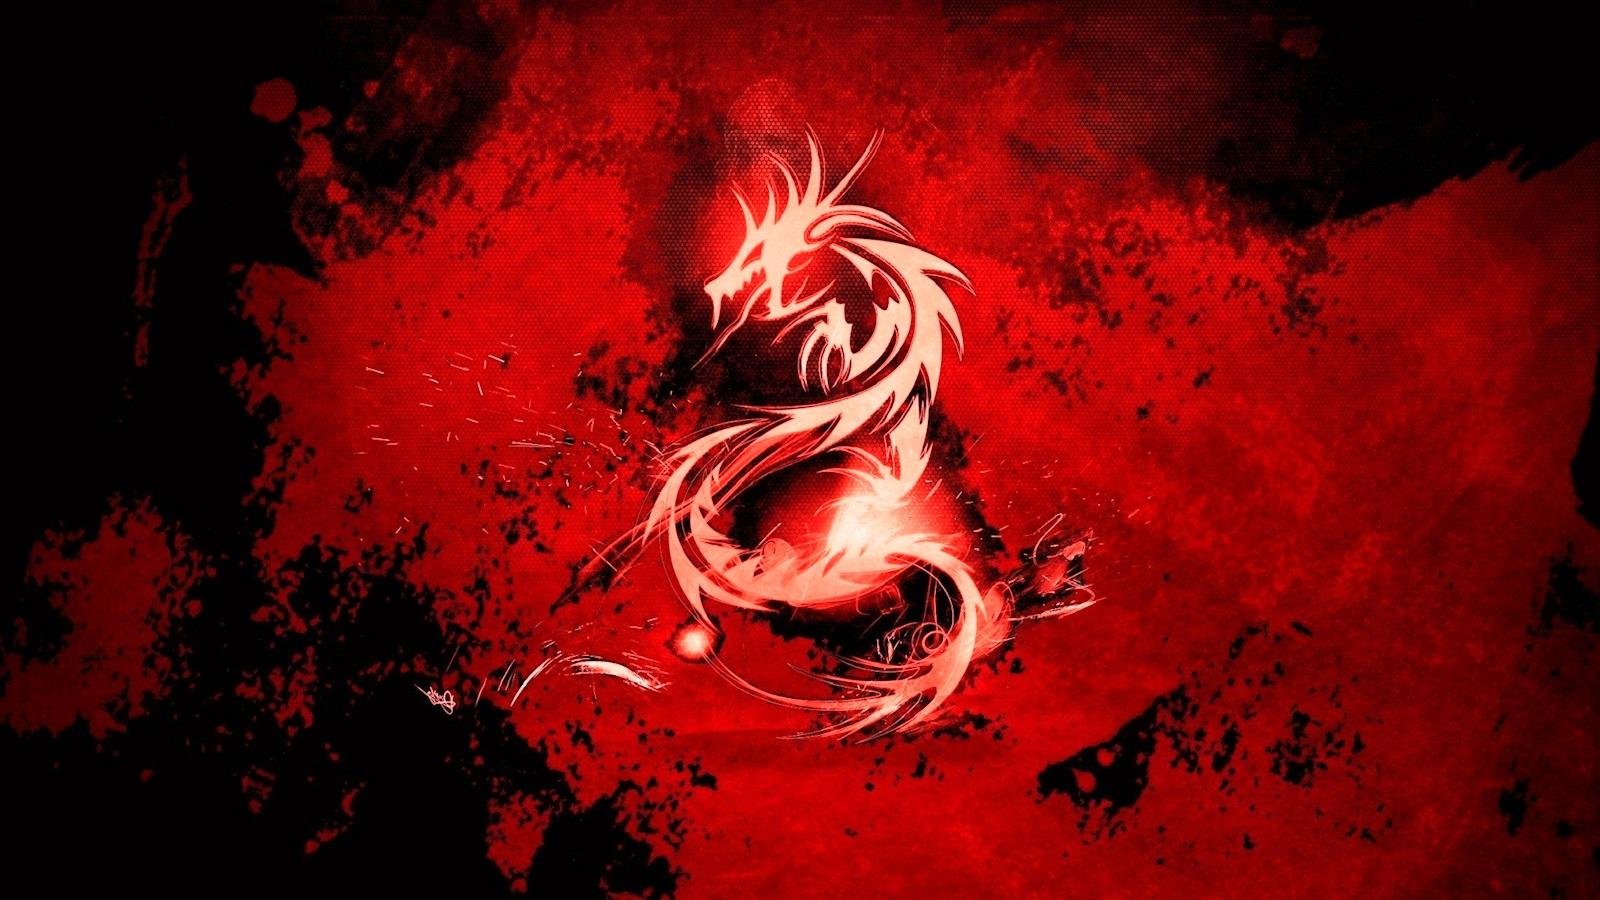 red dragon wallpaper,red,graphic design,font,water,illustration